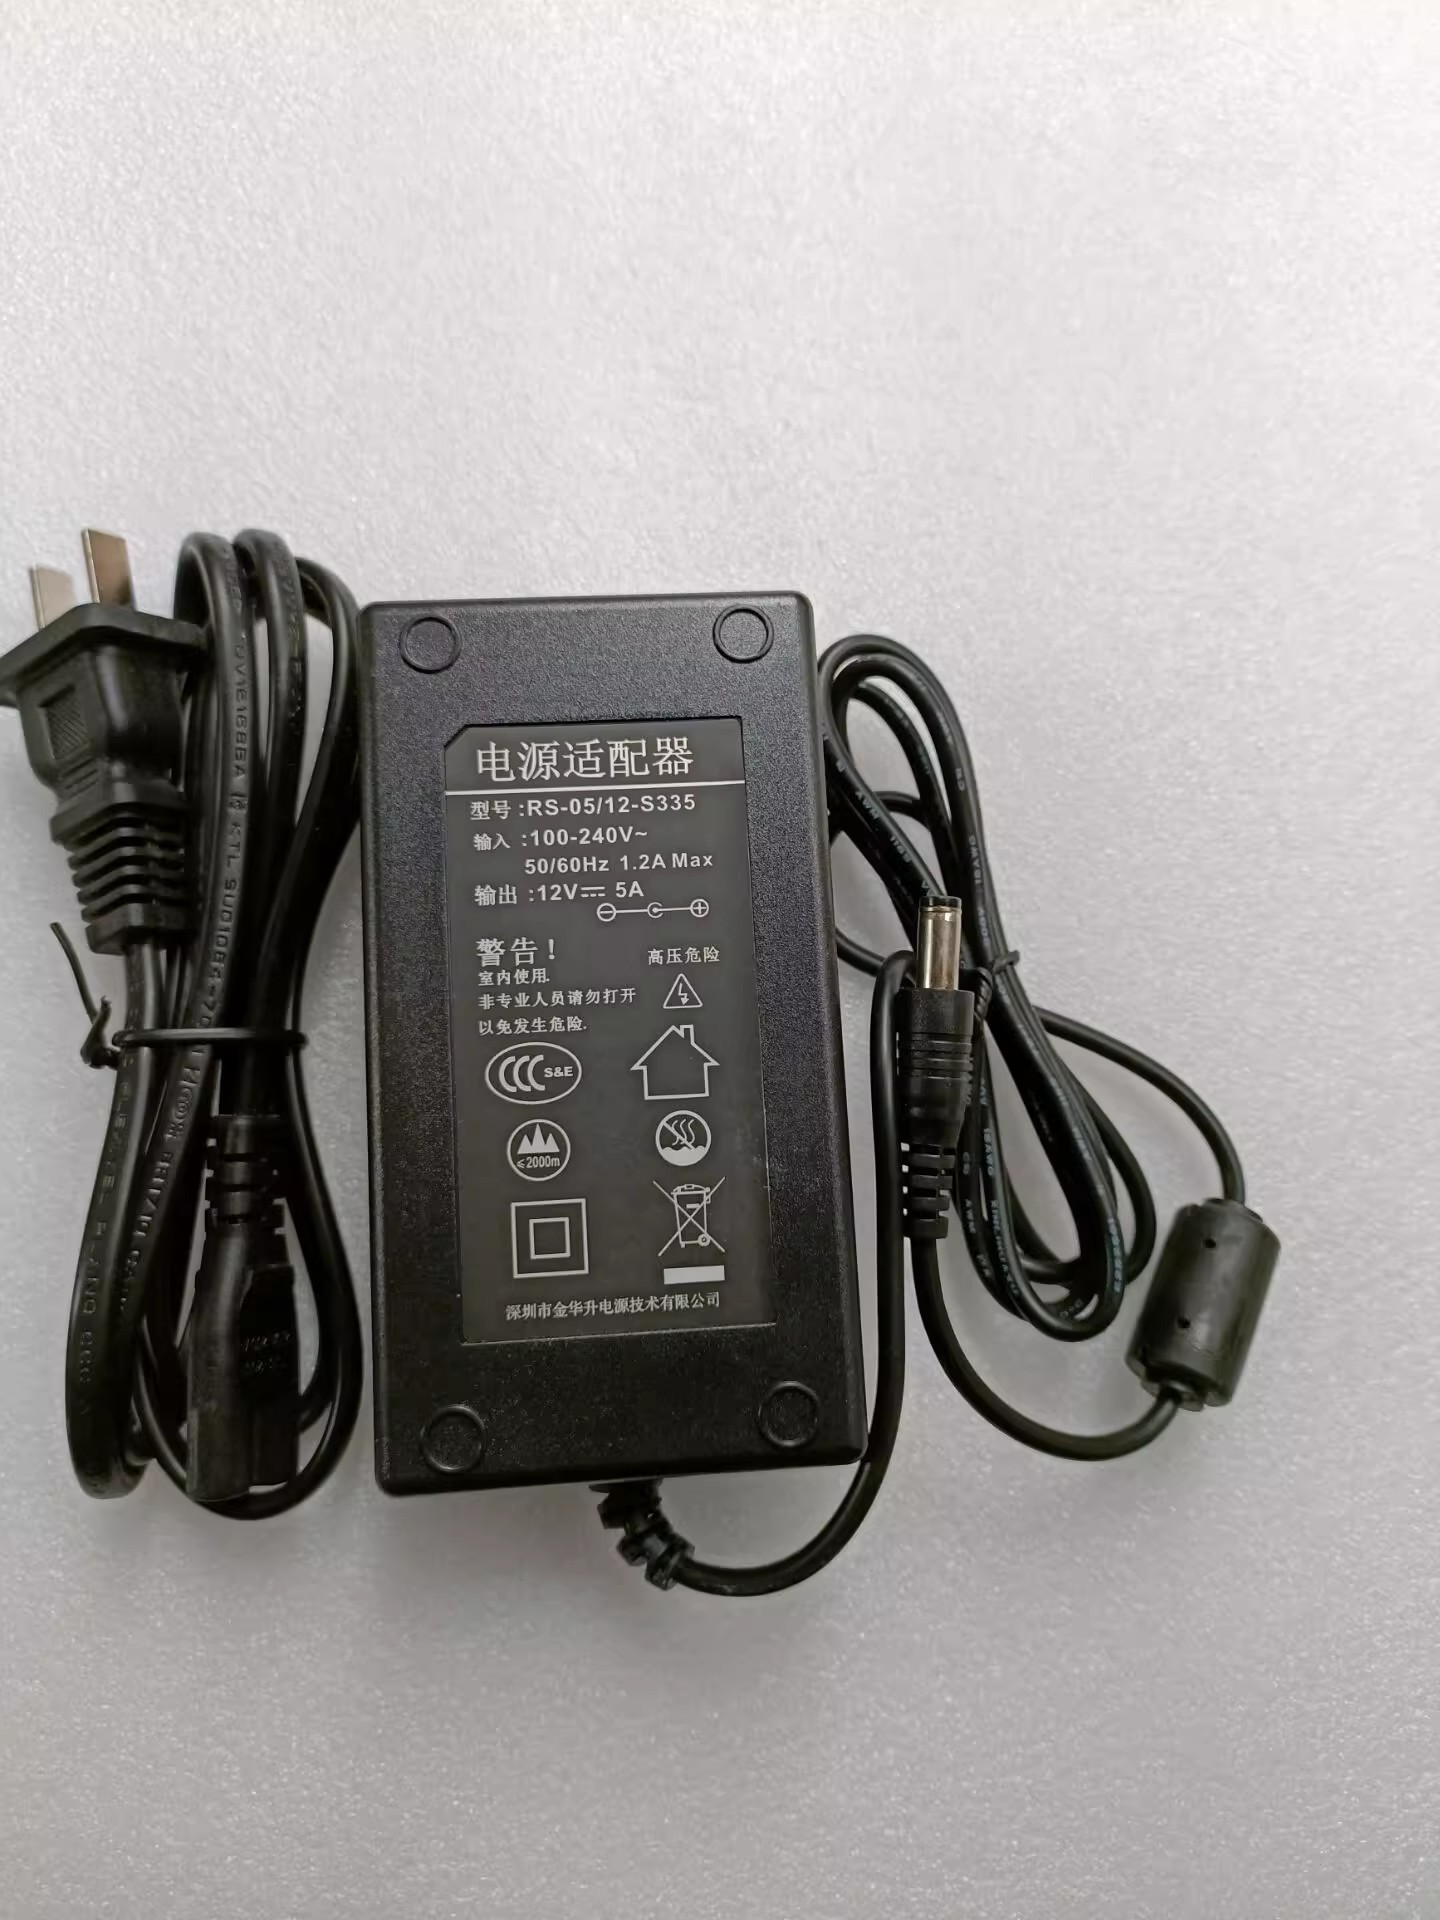 *Brand NEW*RS-05/12-S335 12V 5A AC DC ADAPTHE POWER Supply - Click Image to Close